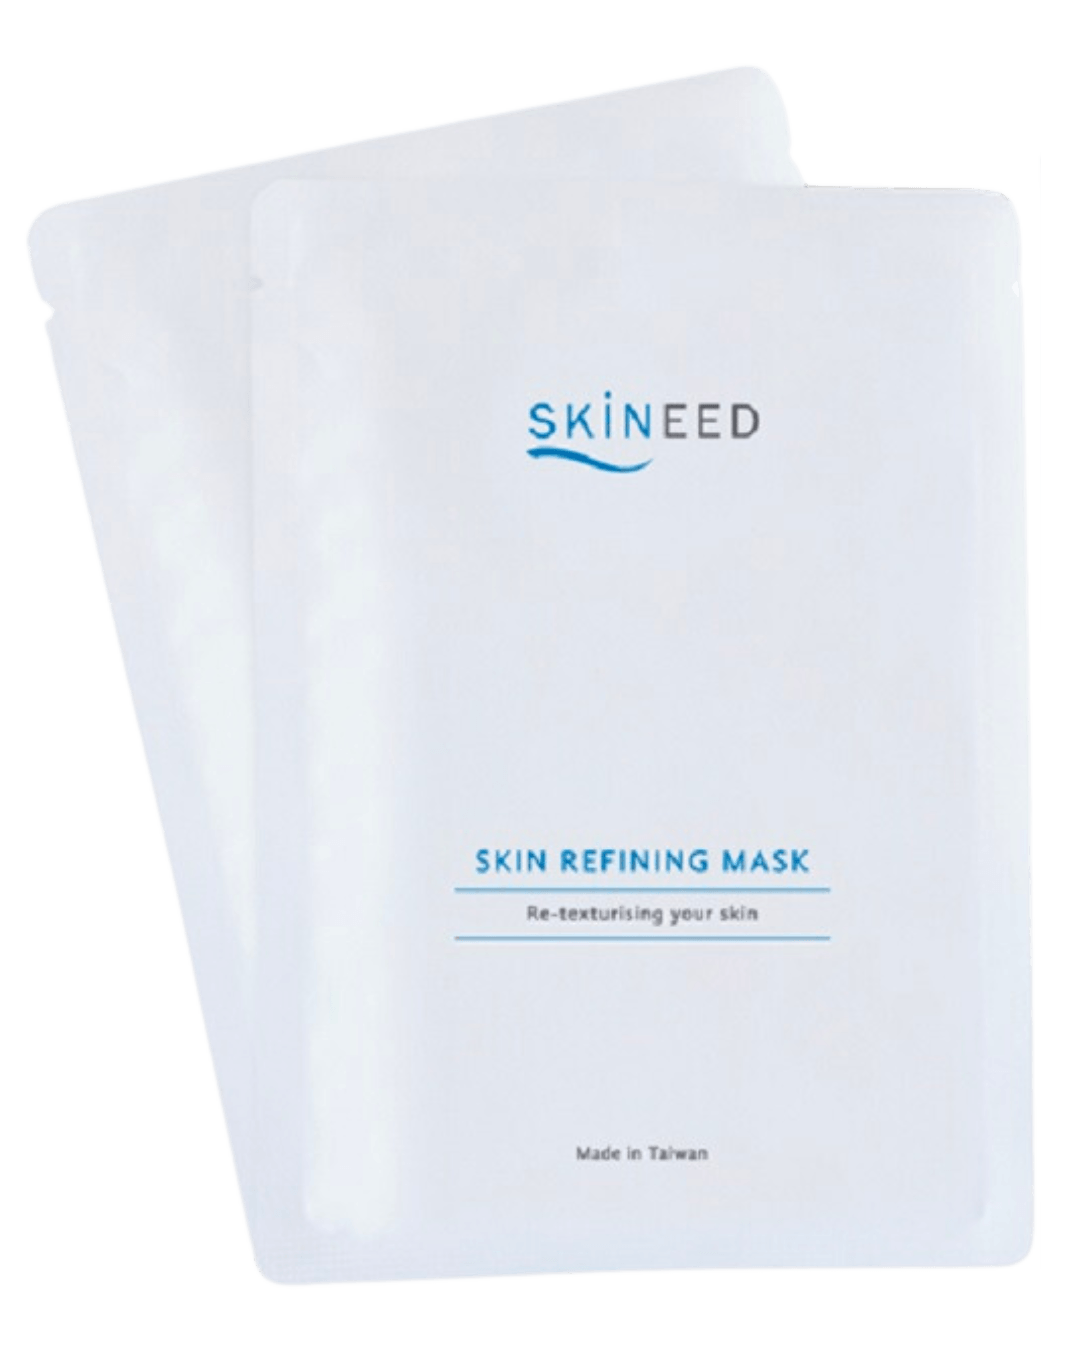 Daily Vanity Beauty Awards 2024 Best Skincare SKiNEED Skin Refining Mask Voted By Beauty Experts